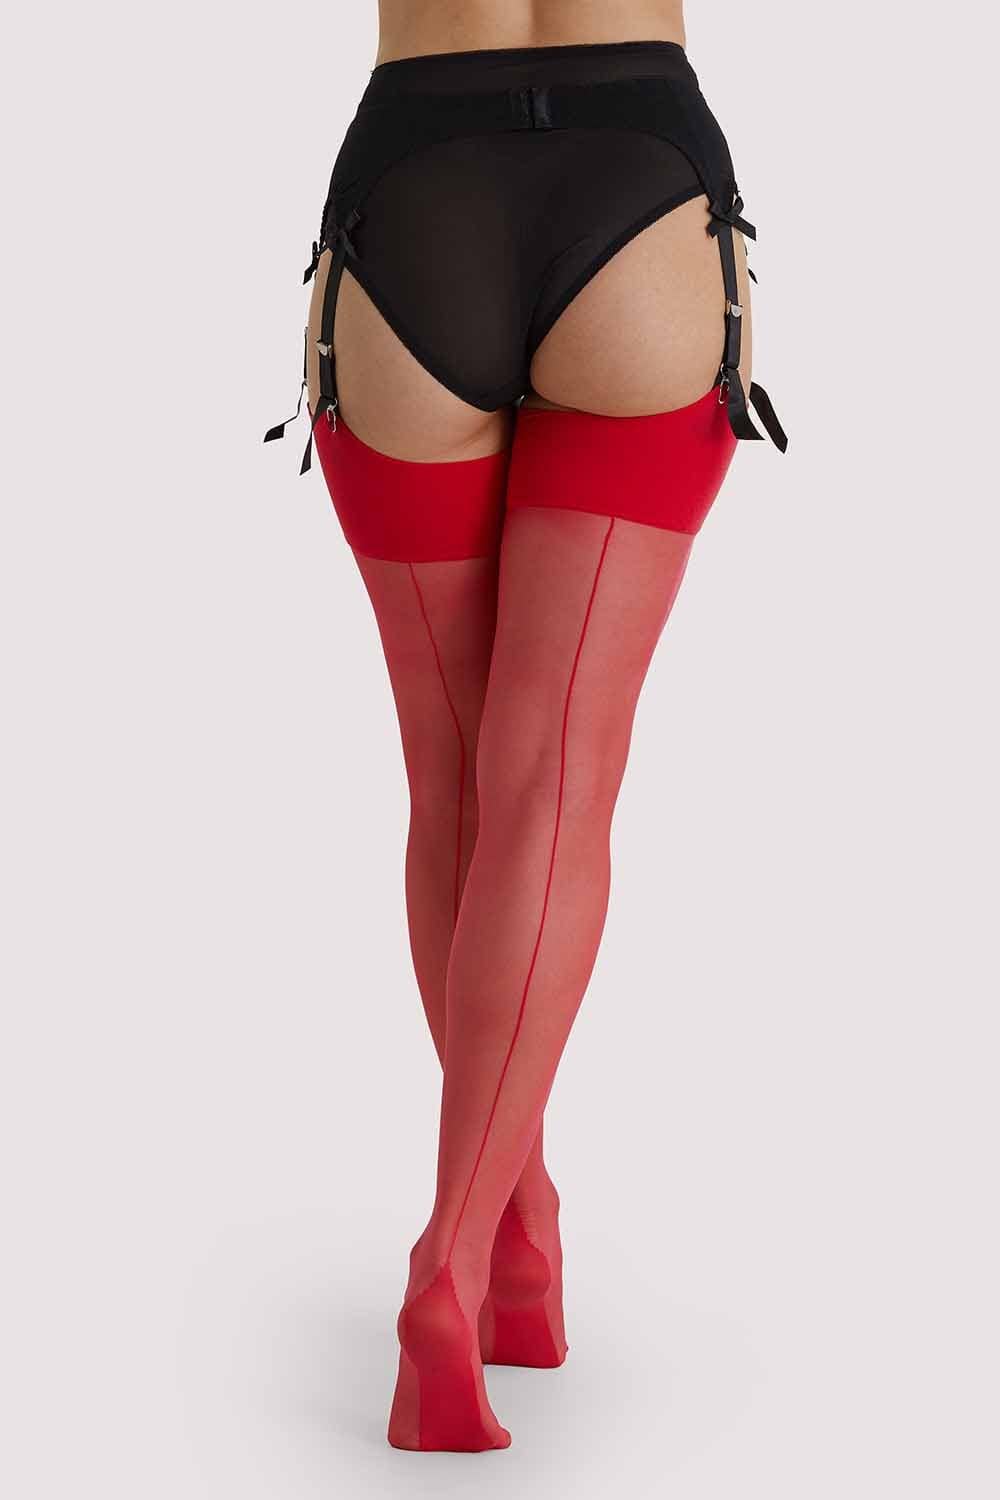 Seamed Stockings Red US 4 - 18 Tall